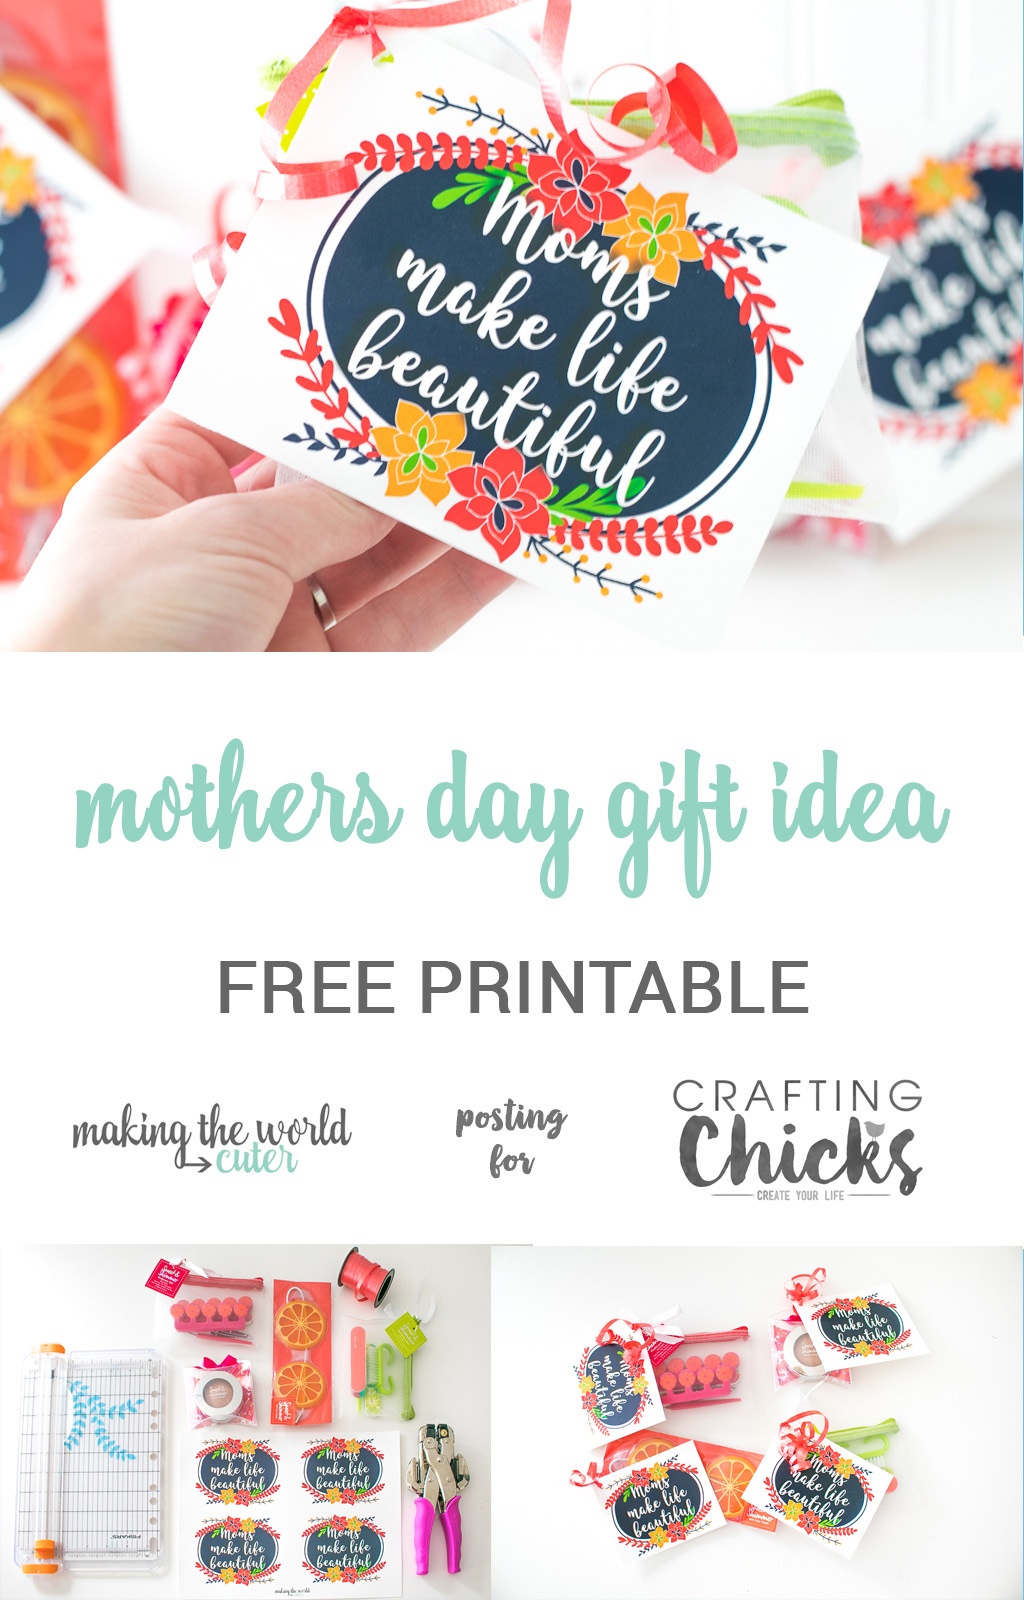 Mothers Day Gift Idea For Friends With Free Printable - Free Printable Mothers Day Gifts